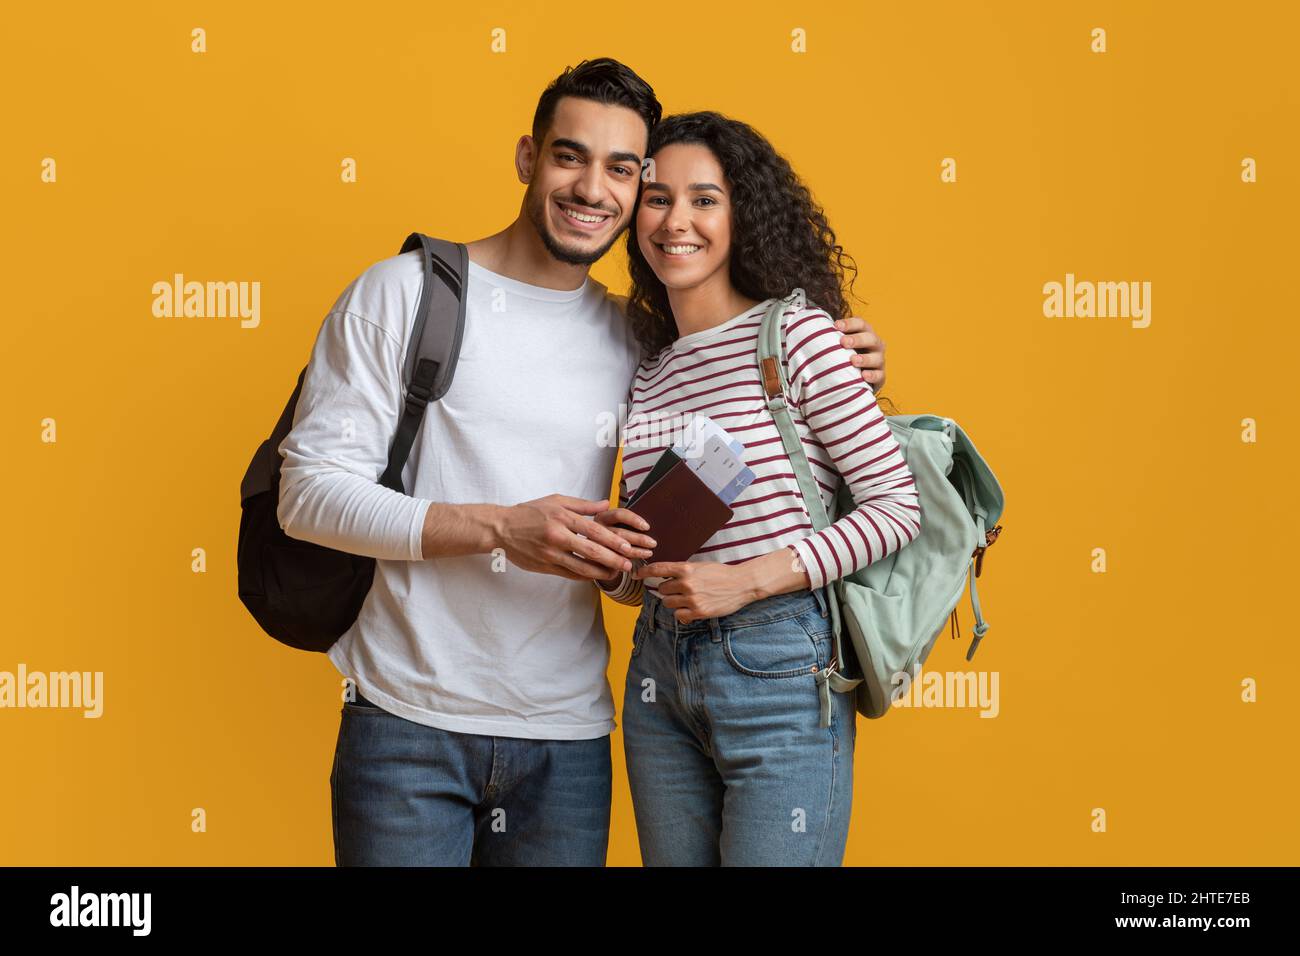 Portrait Of Smiling Arab Travellers Couple With Backpacks, Passports And Tickets Stock Photo